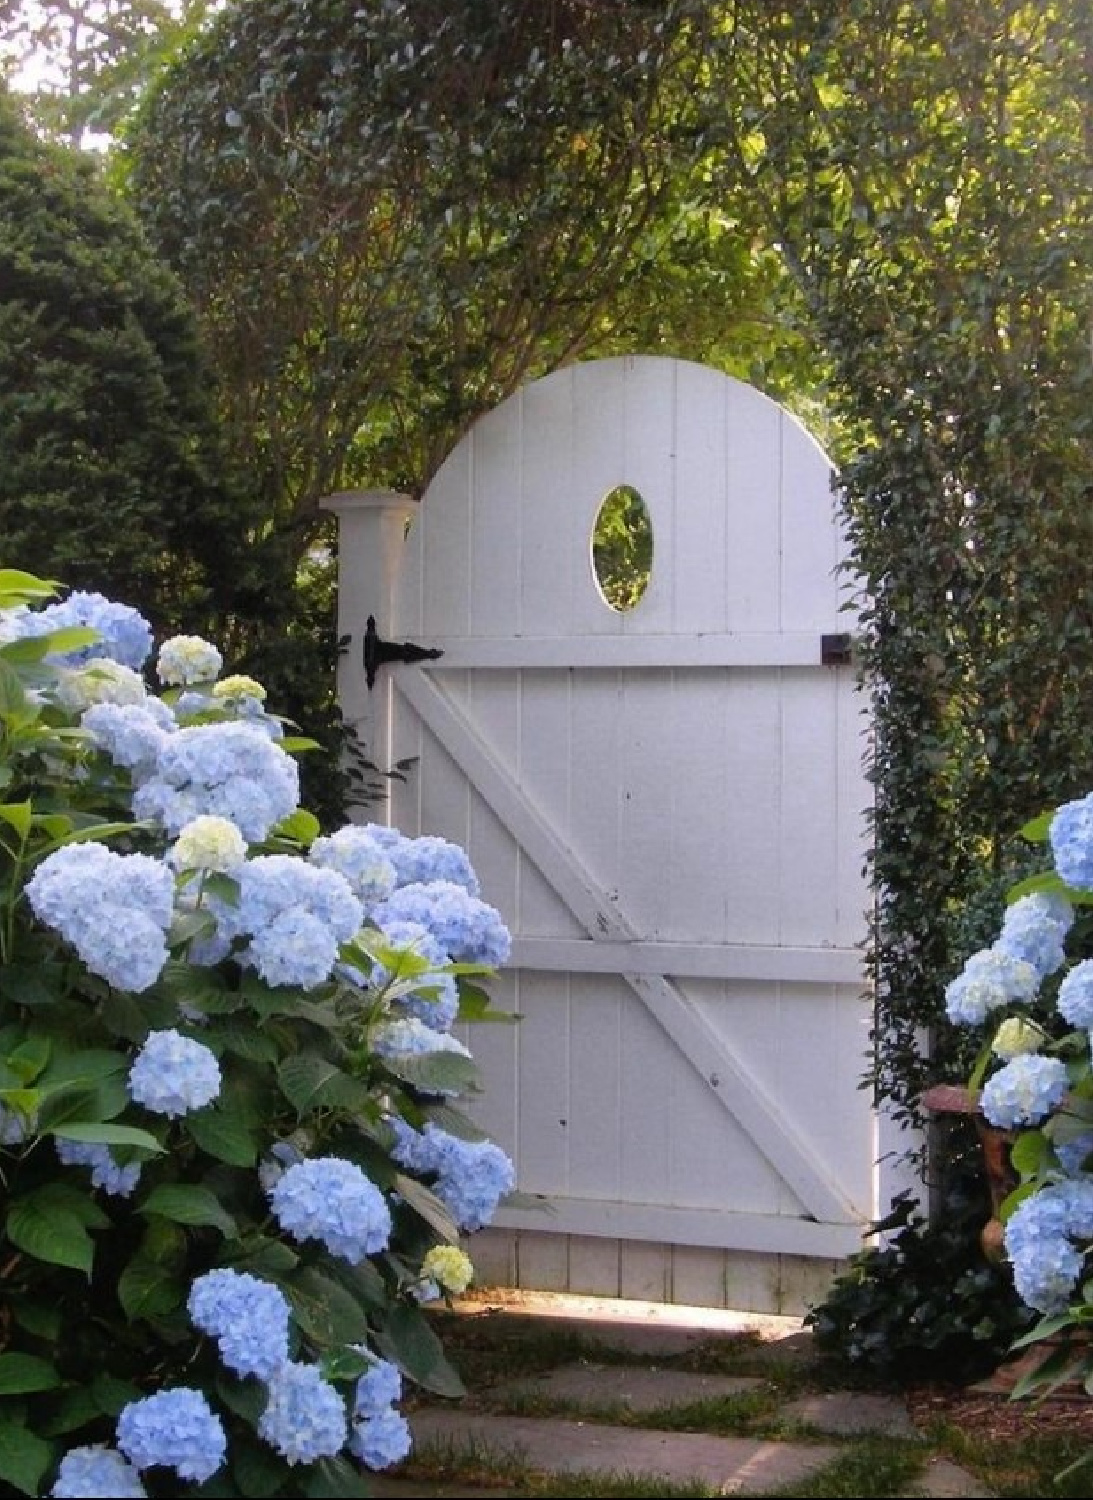 Hamptons style garden with blue hydrangeas and white wood arched wood gate - via Roman_And_Ivy. #hamptonsstyle #coastalstyle #coastalgarden #hamptonsgarden #easthampton